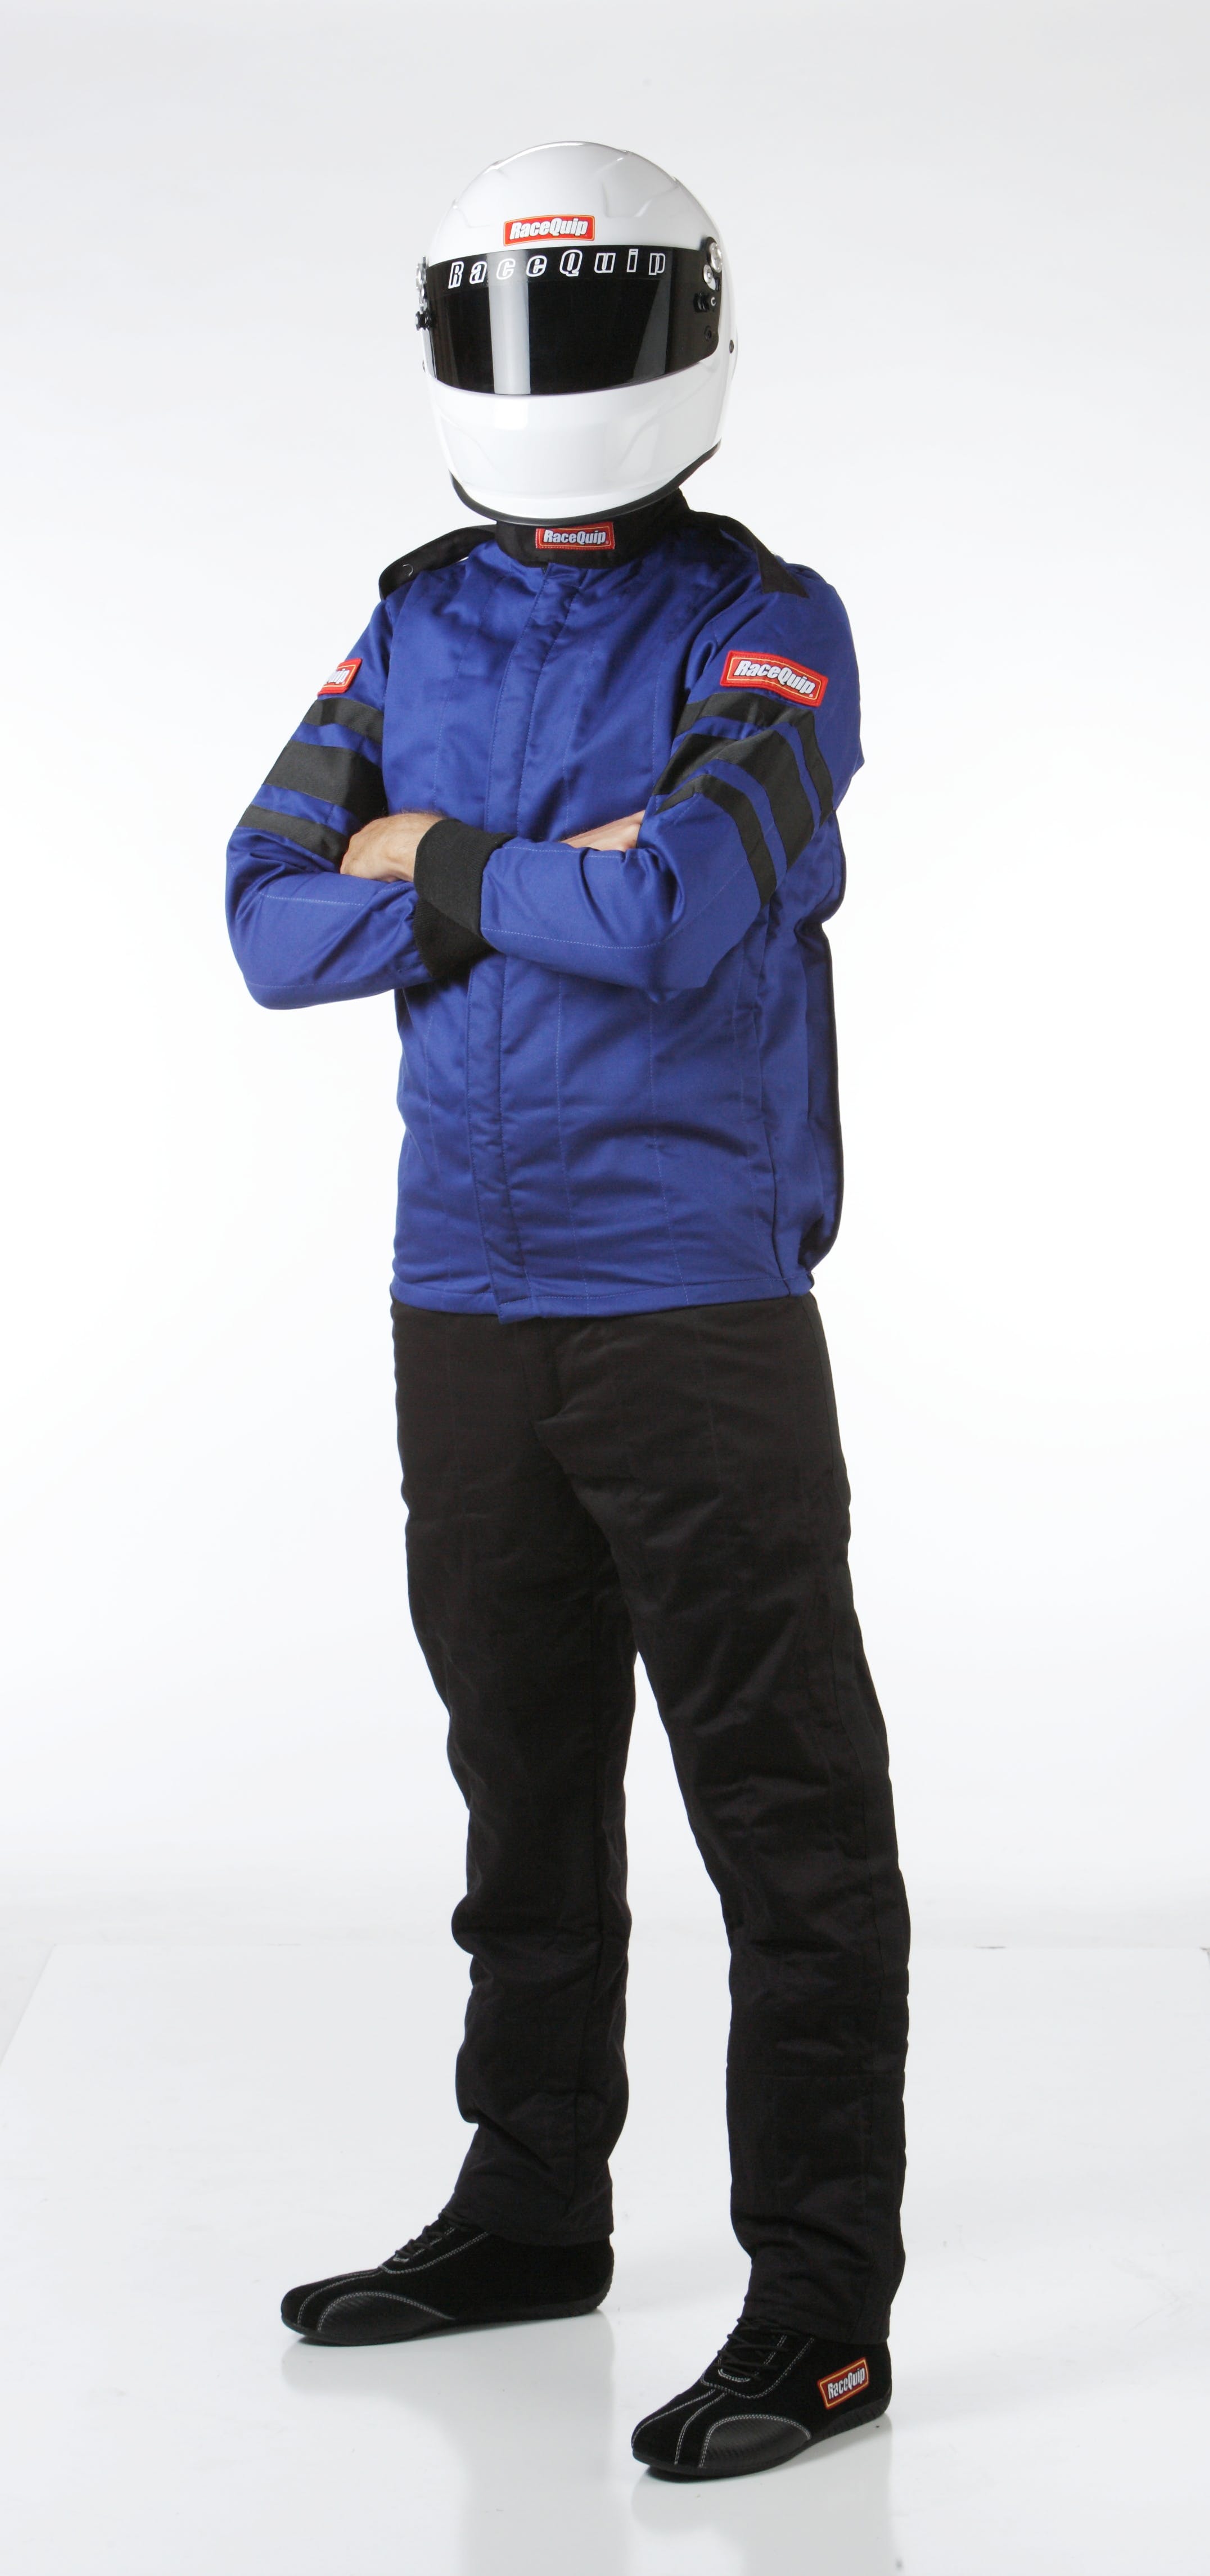 RaceQuip 121022 SFI-5 Pyrovatex Multi-Layer Racing Fire Jacket (Blue, Small)